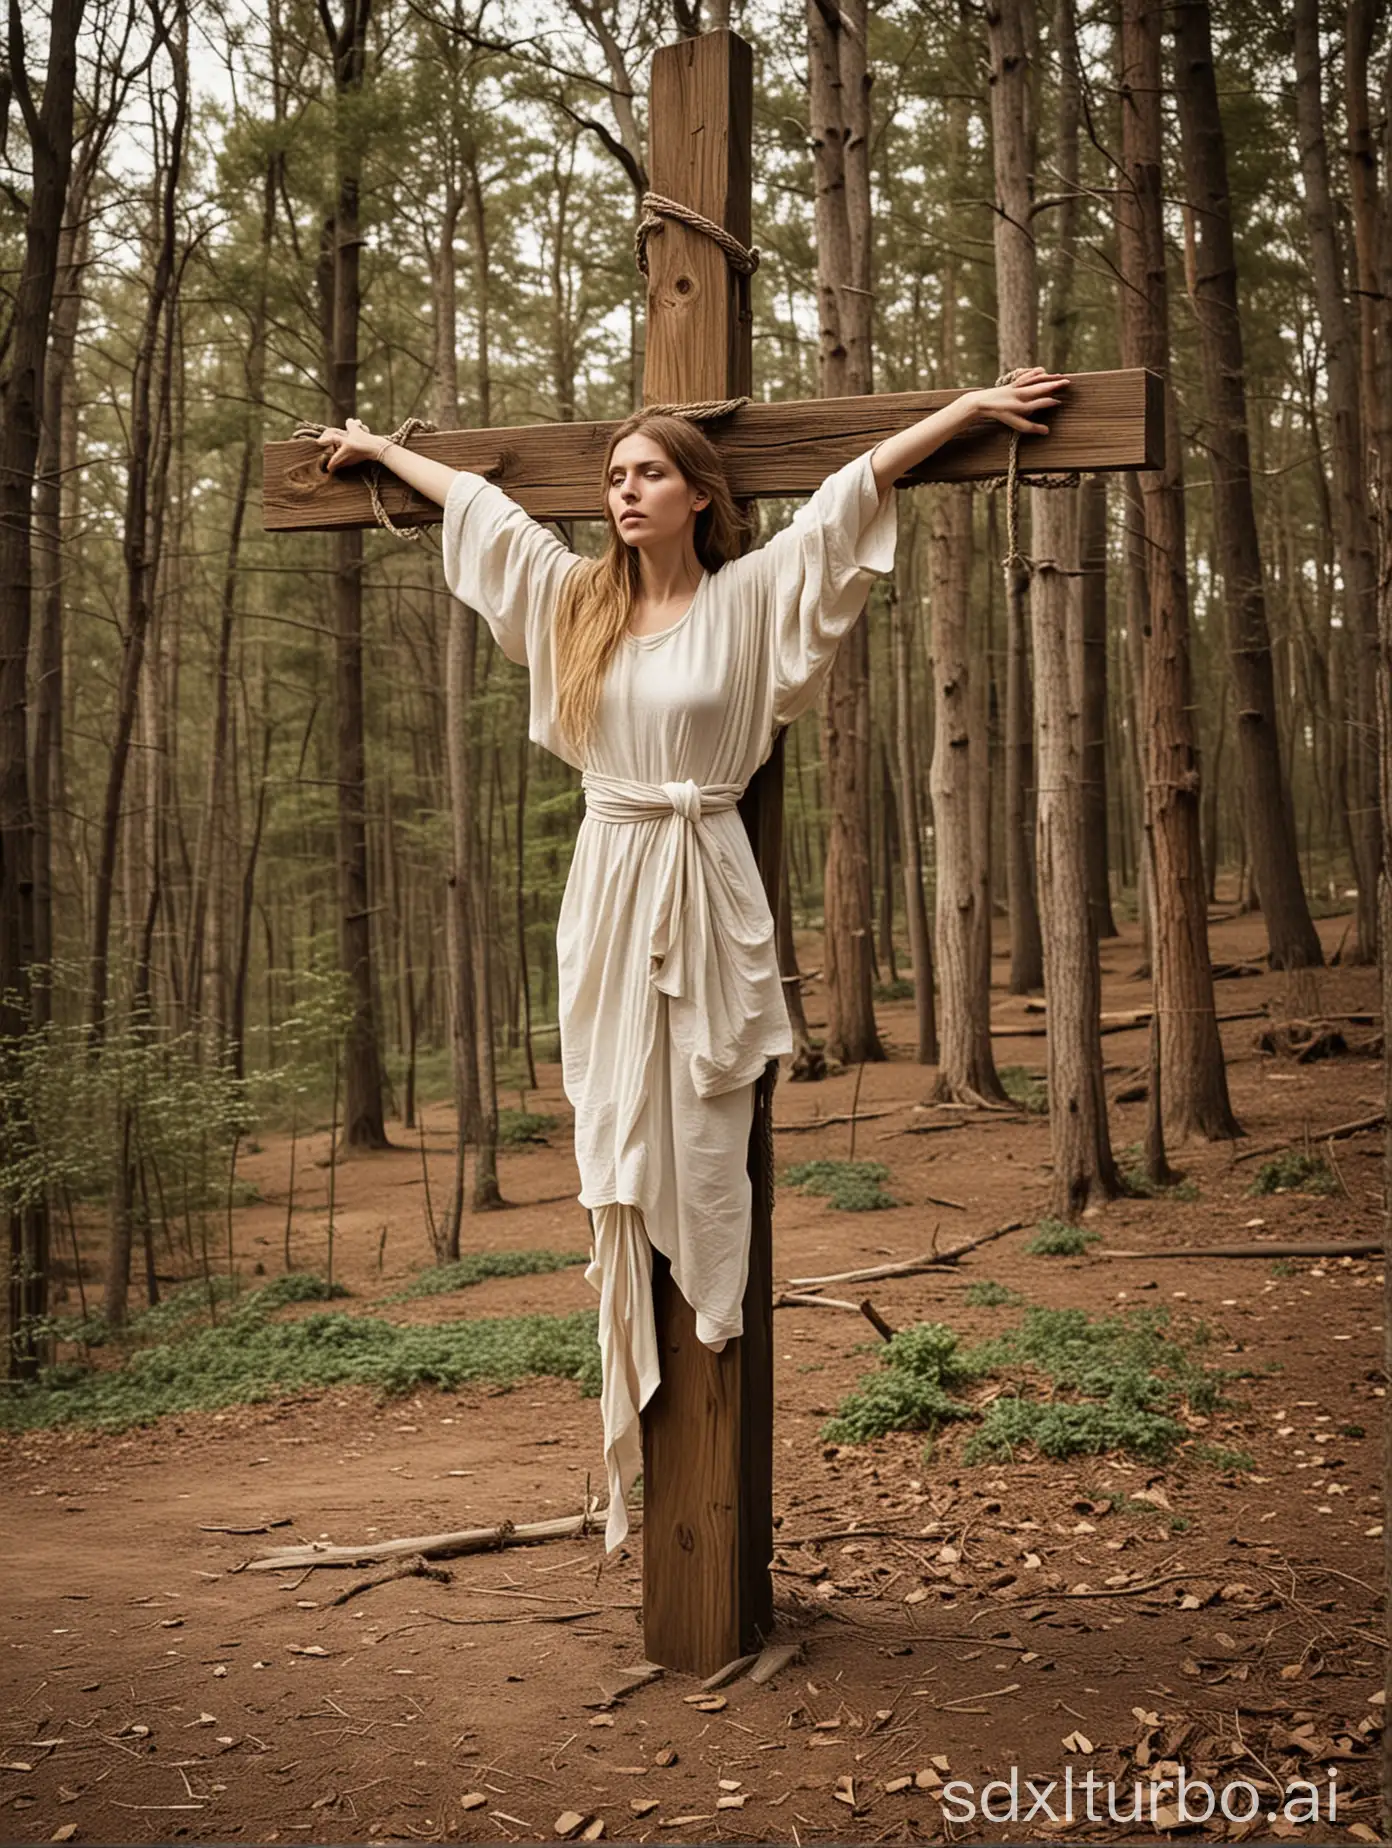 Woman-Tied-to-Giant-Wooden-Cross-for-Dramatic-Expression